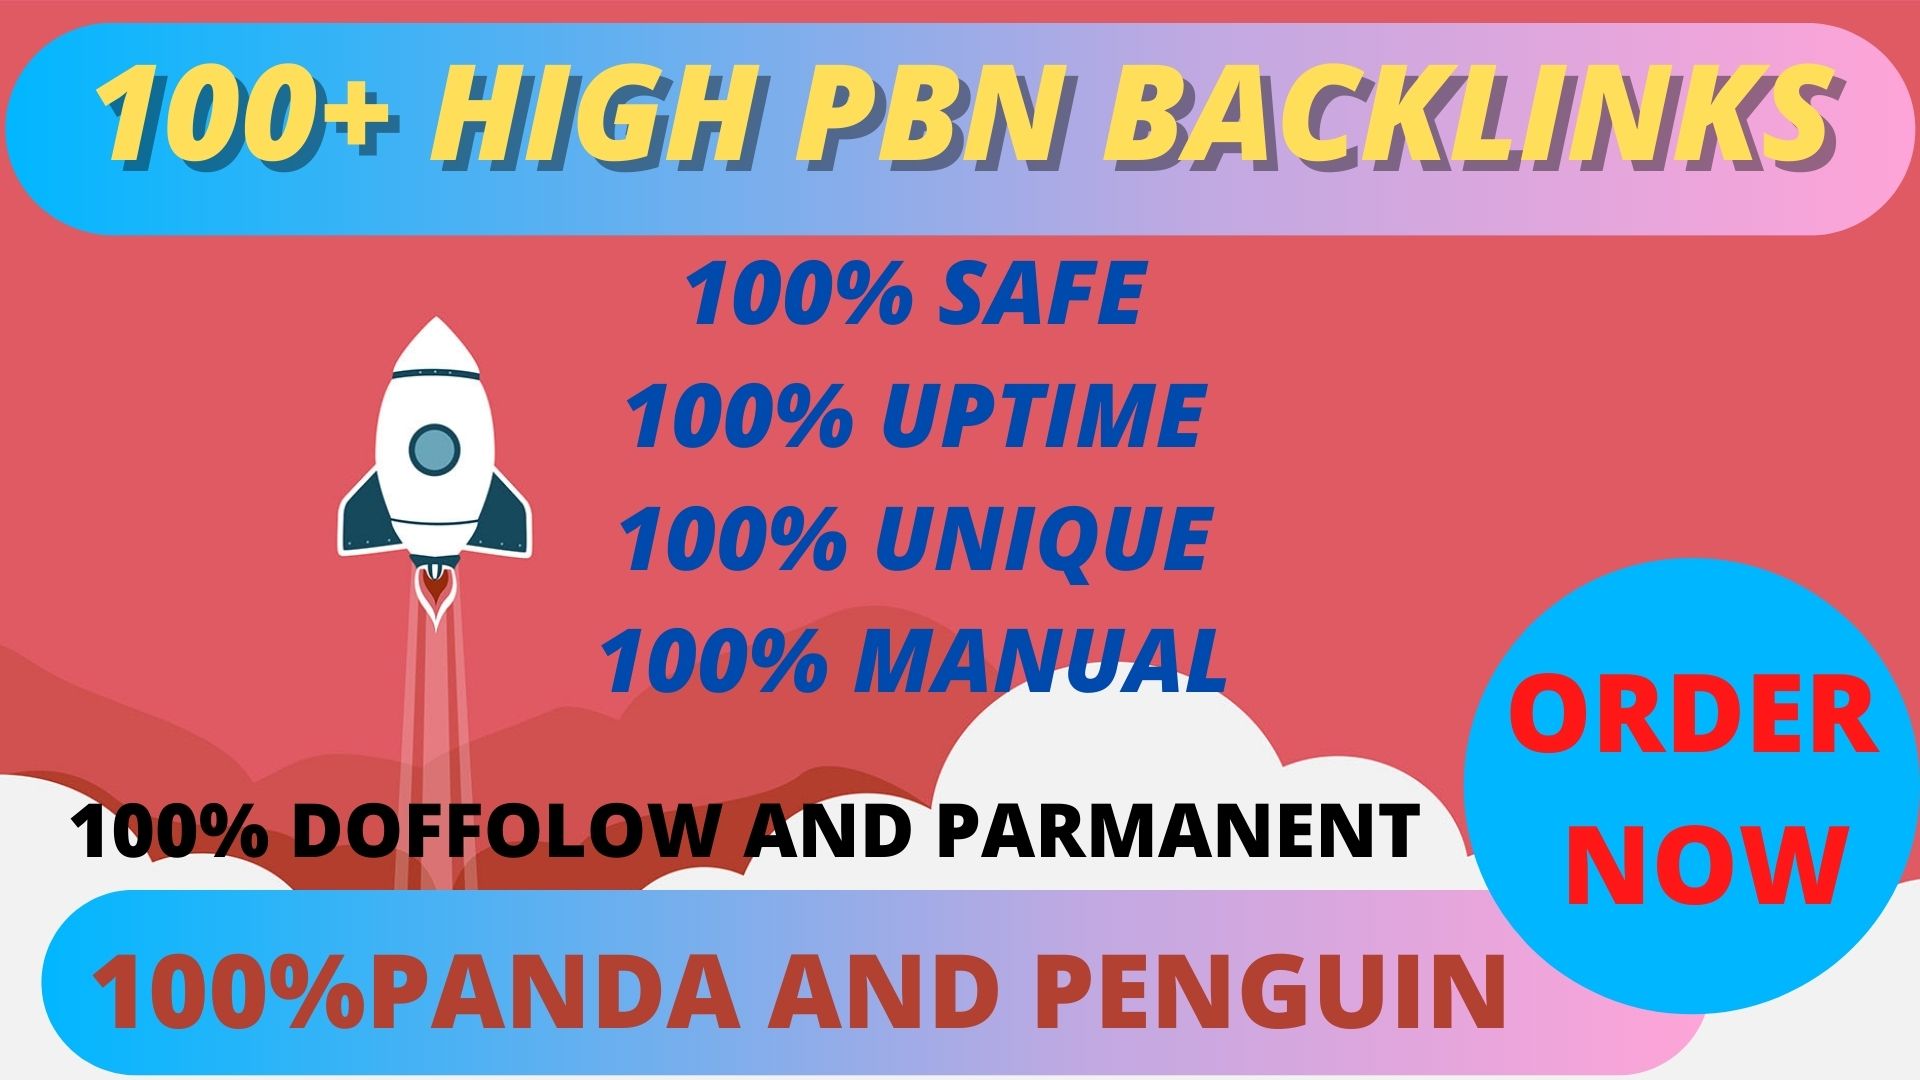  Get powerful 100+ pbn backlinks with high DA/PA on your homepage with unique website. Perfect SEO